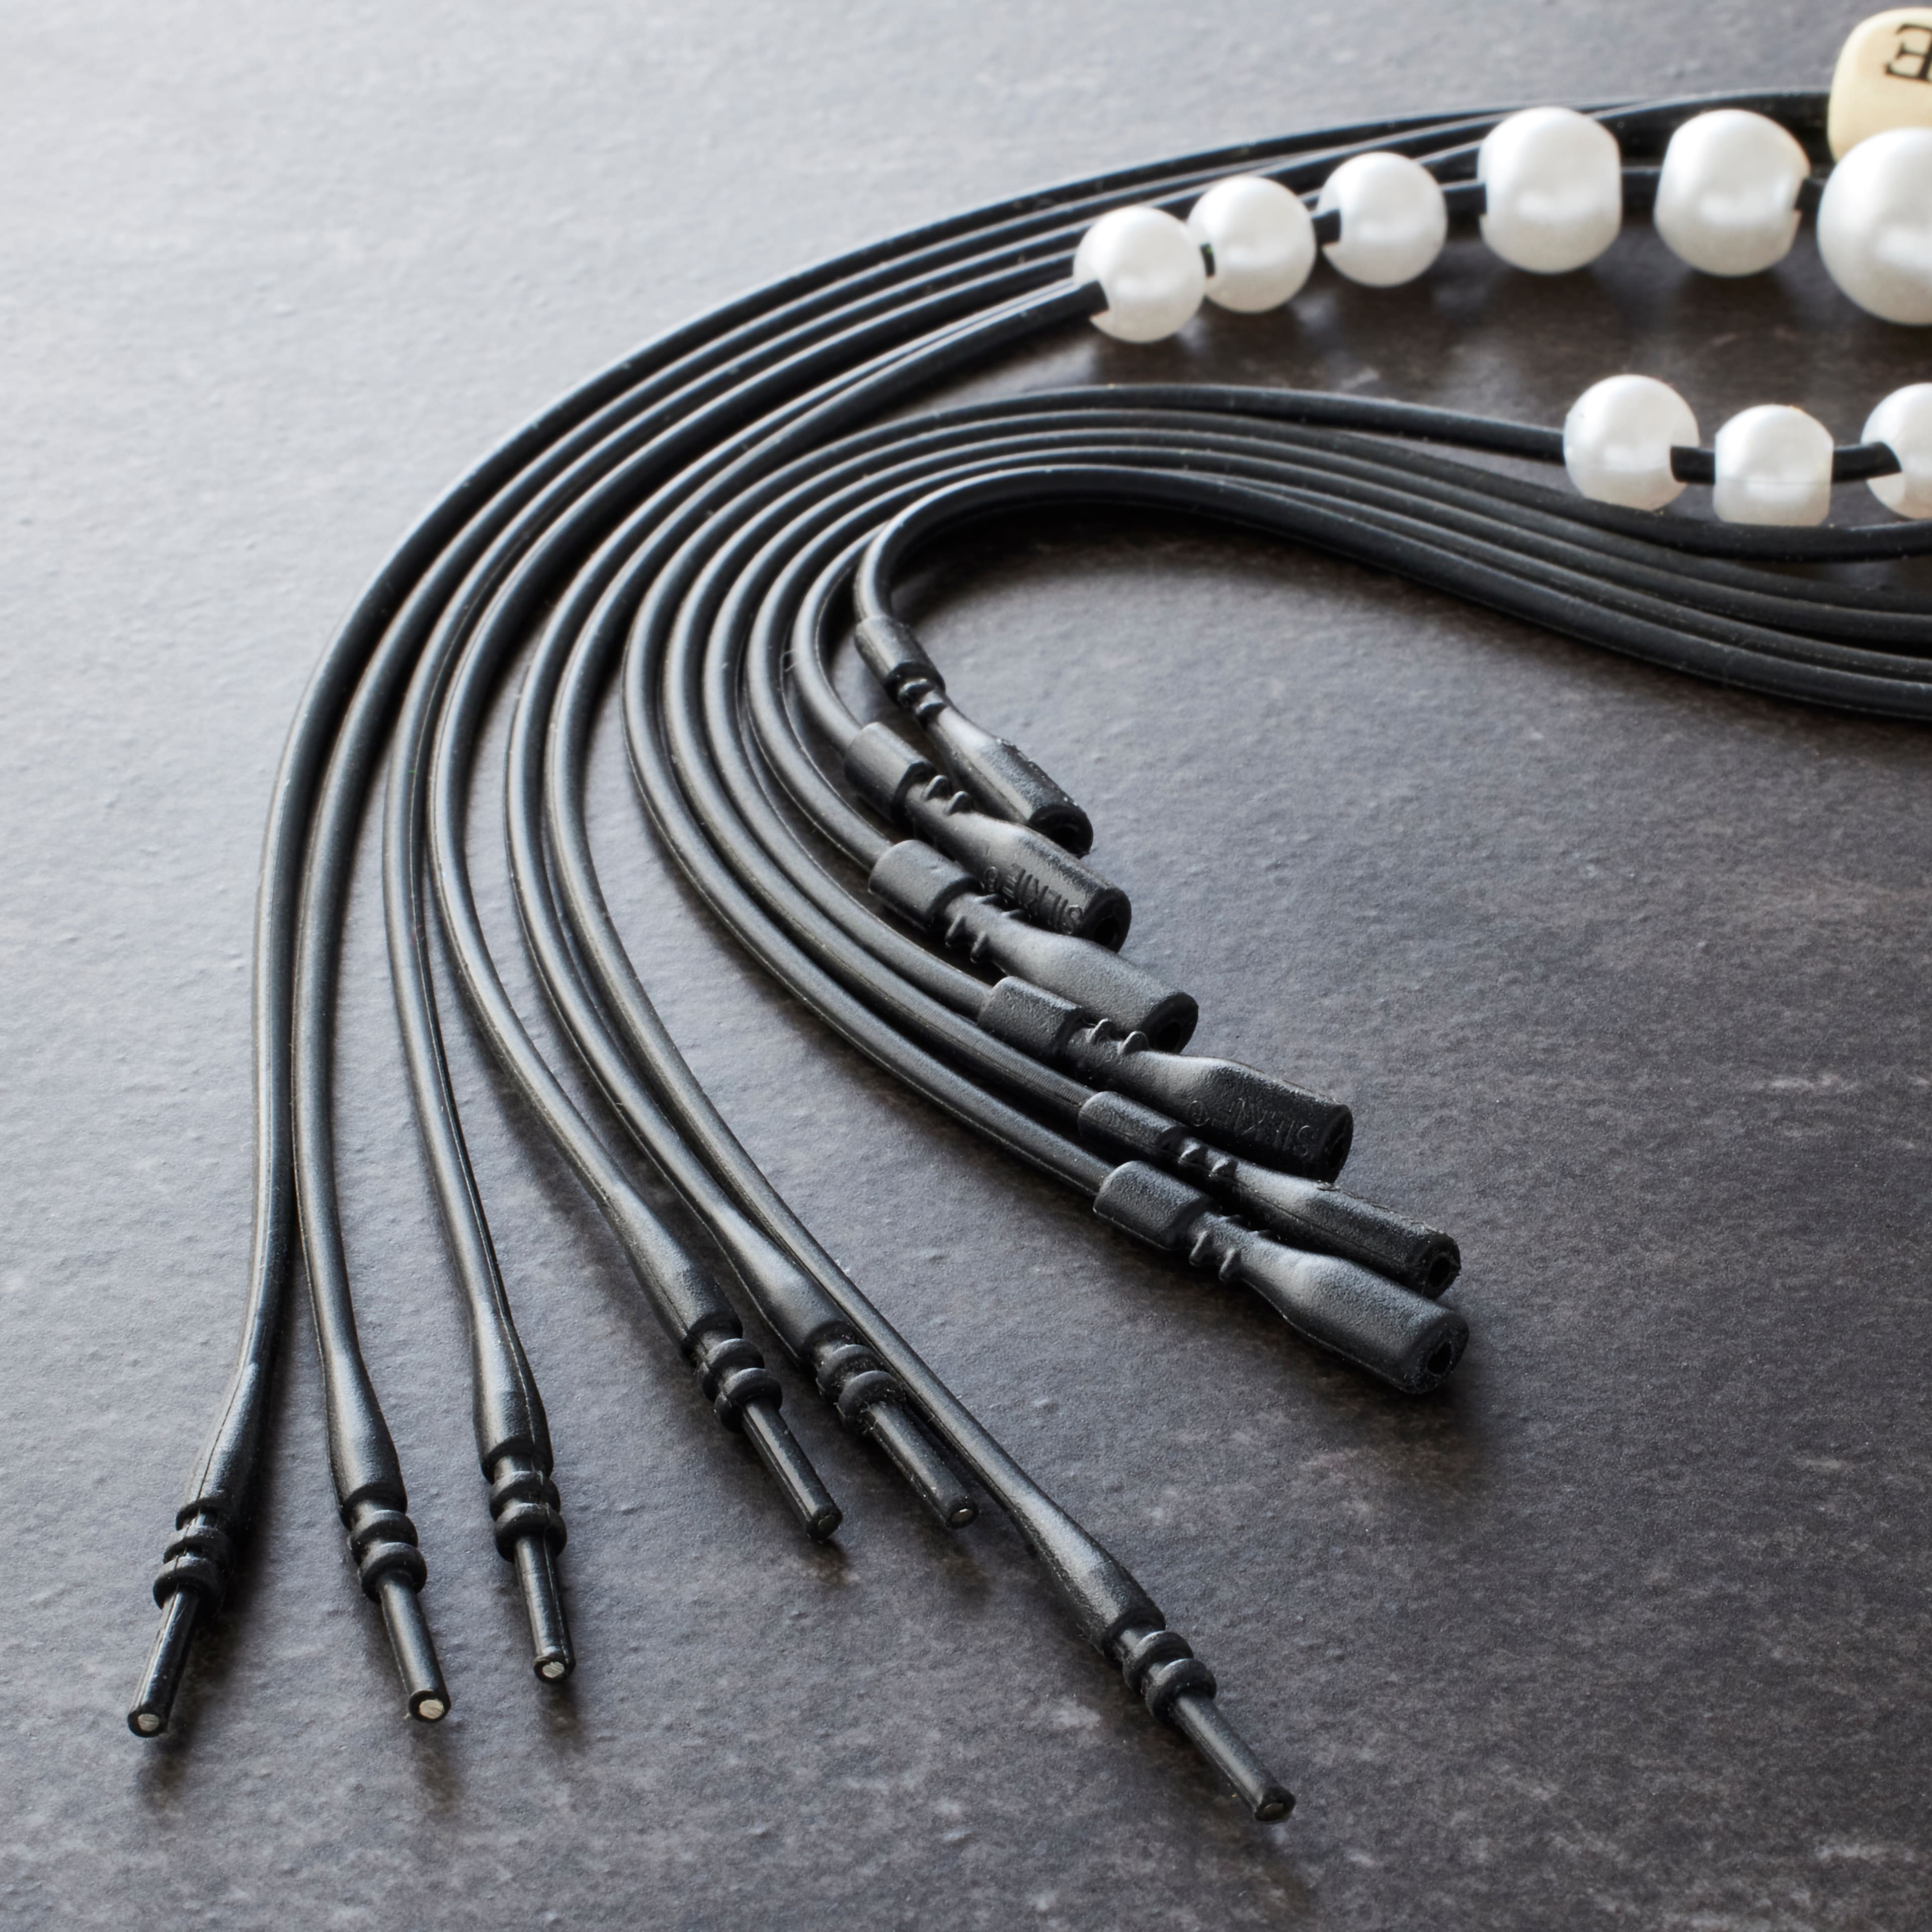 6 Packs: 6 ct. (36 total) Black Stretch Magic Silkies&#x2122; Necklaces